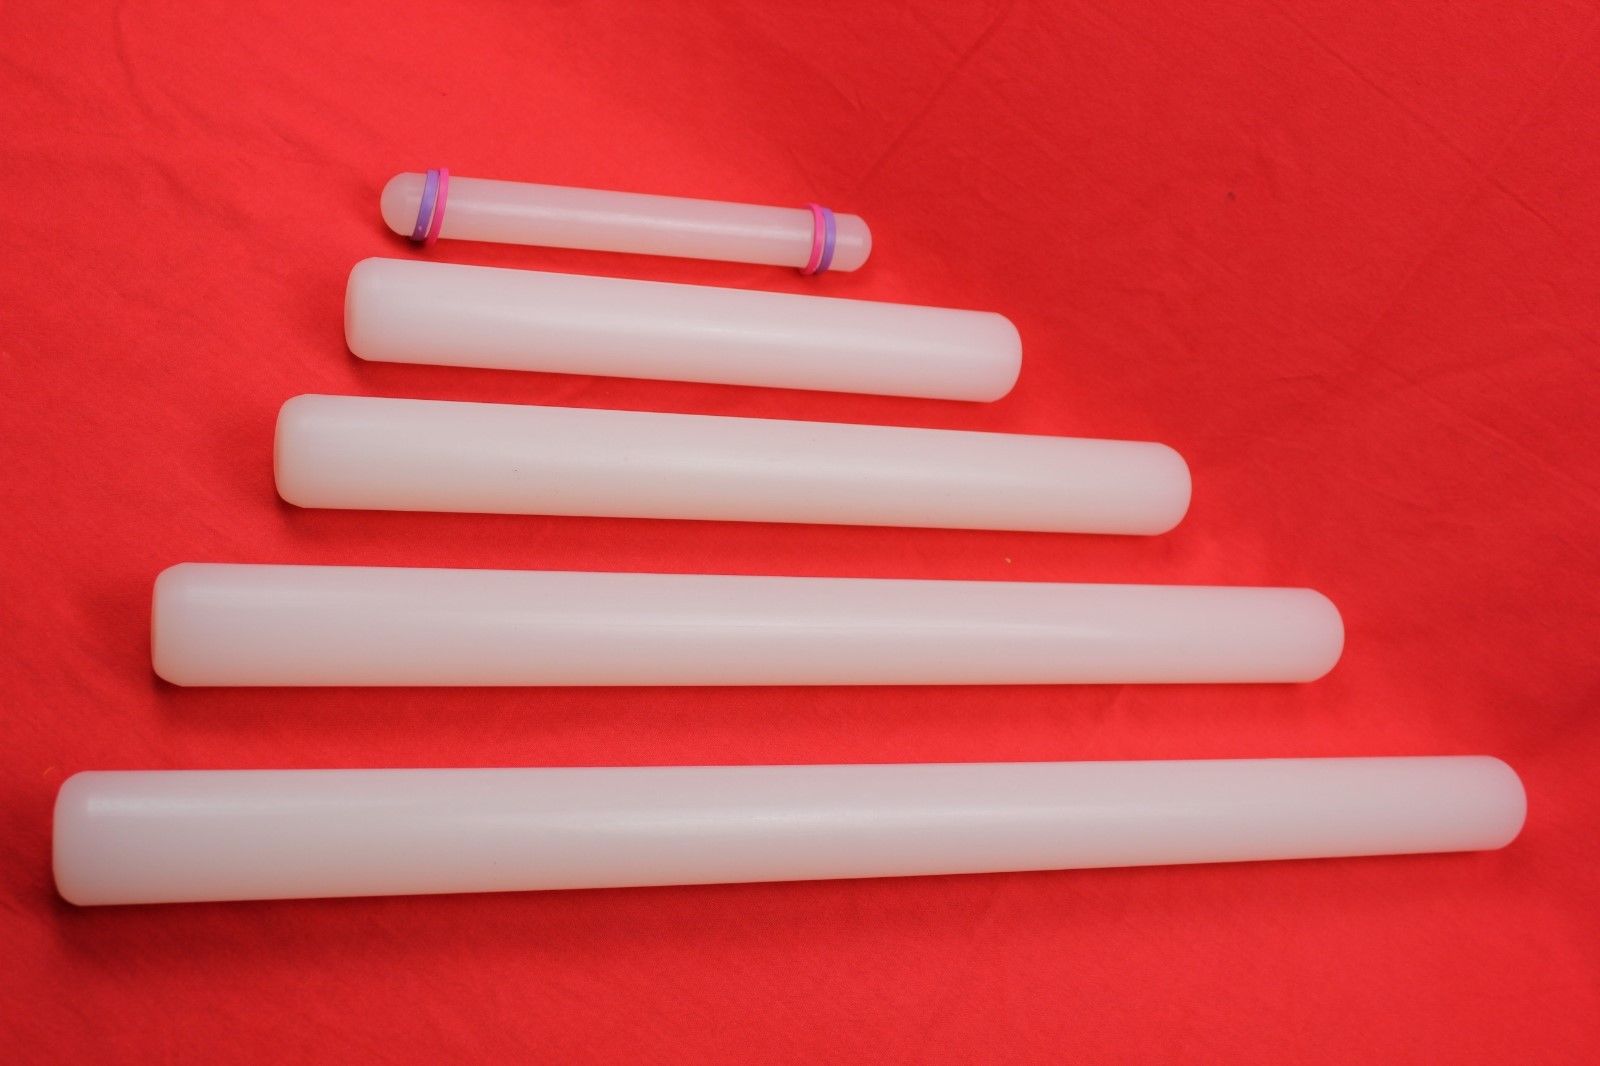 attachment-https://www.cupcakeaddicts.co.uk/wp-content/uploads/imported/7/Plastic-Rolling-Pin-8-Various-sizes-Cake-Pastry-UK-SELLER-Same-day-dispatch-323097813287-6.jpg